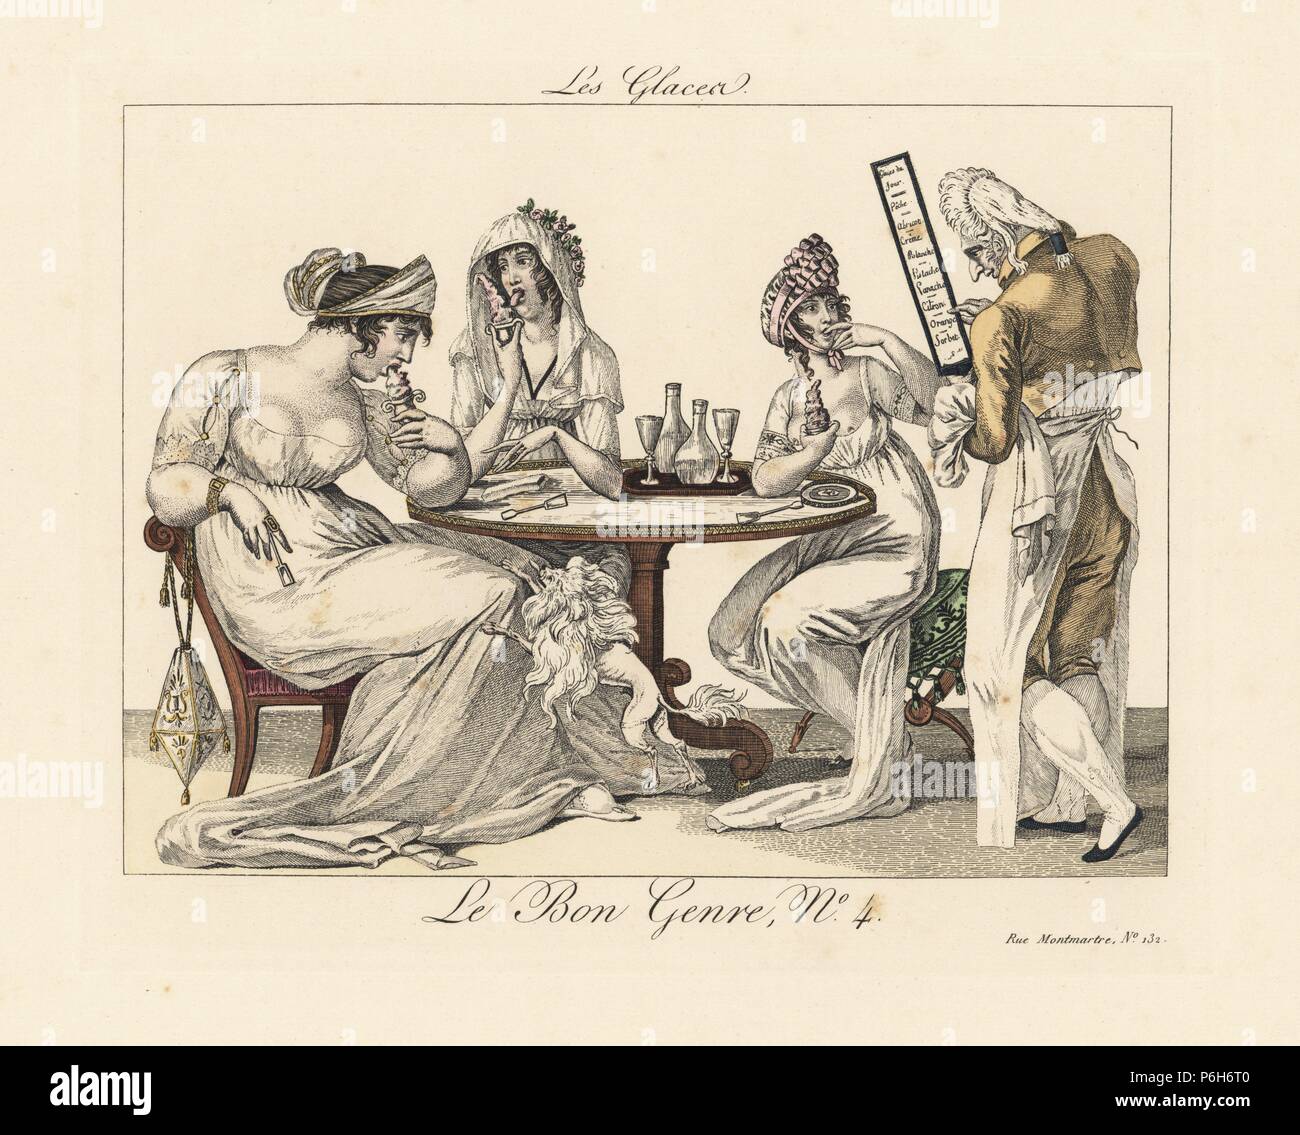 Fashionable women or merveilleuses eating ice cream with their dogs at a cafe, circa 1800. The menu includes lemon, orange, pistachio, and creme blanche. 'Parisiennes are the most graceful of women, even when eating greedily.' Handcoloured engraving from Pierre de la Mesangere's Le Bon Genre, Paris, 1817. Stock Photo